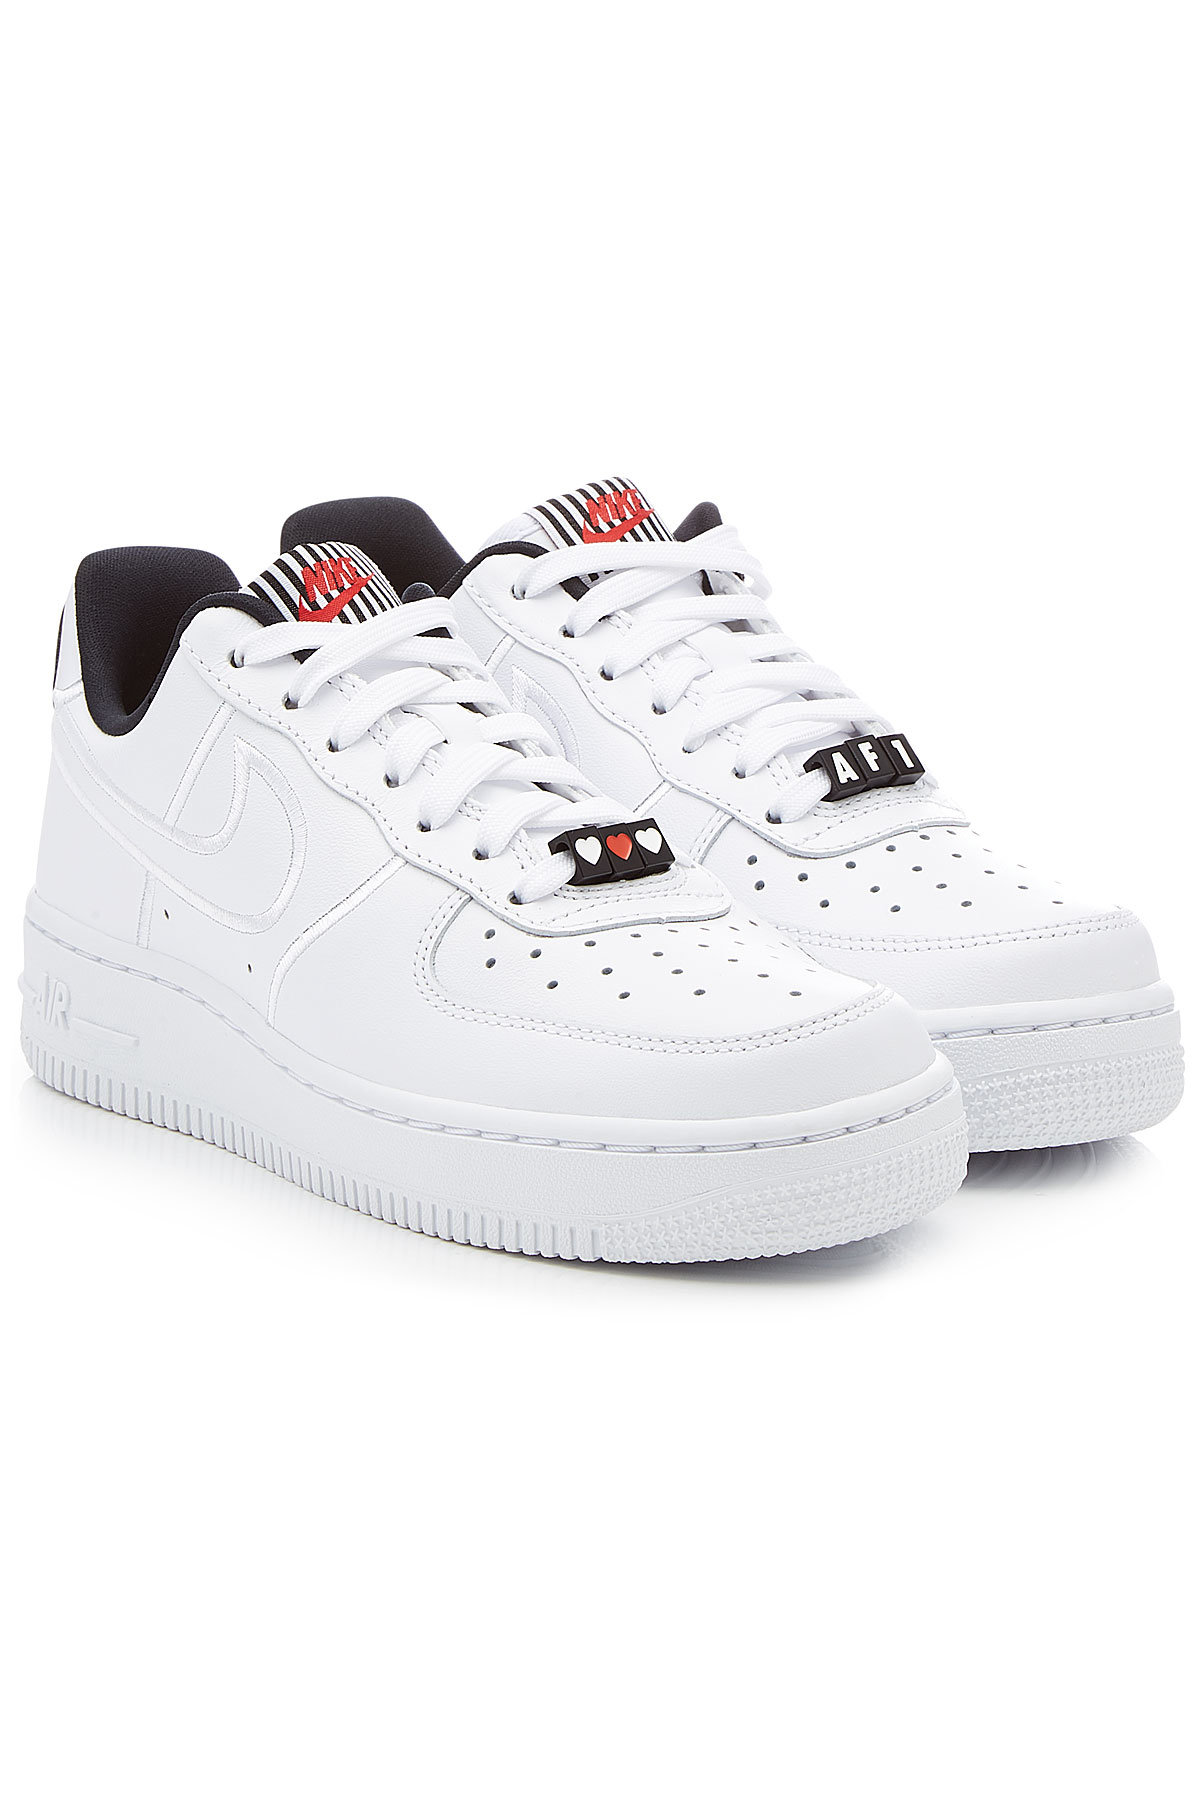 Nike - Air Force 1 Low Top Leather Sneakers